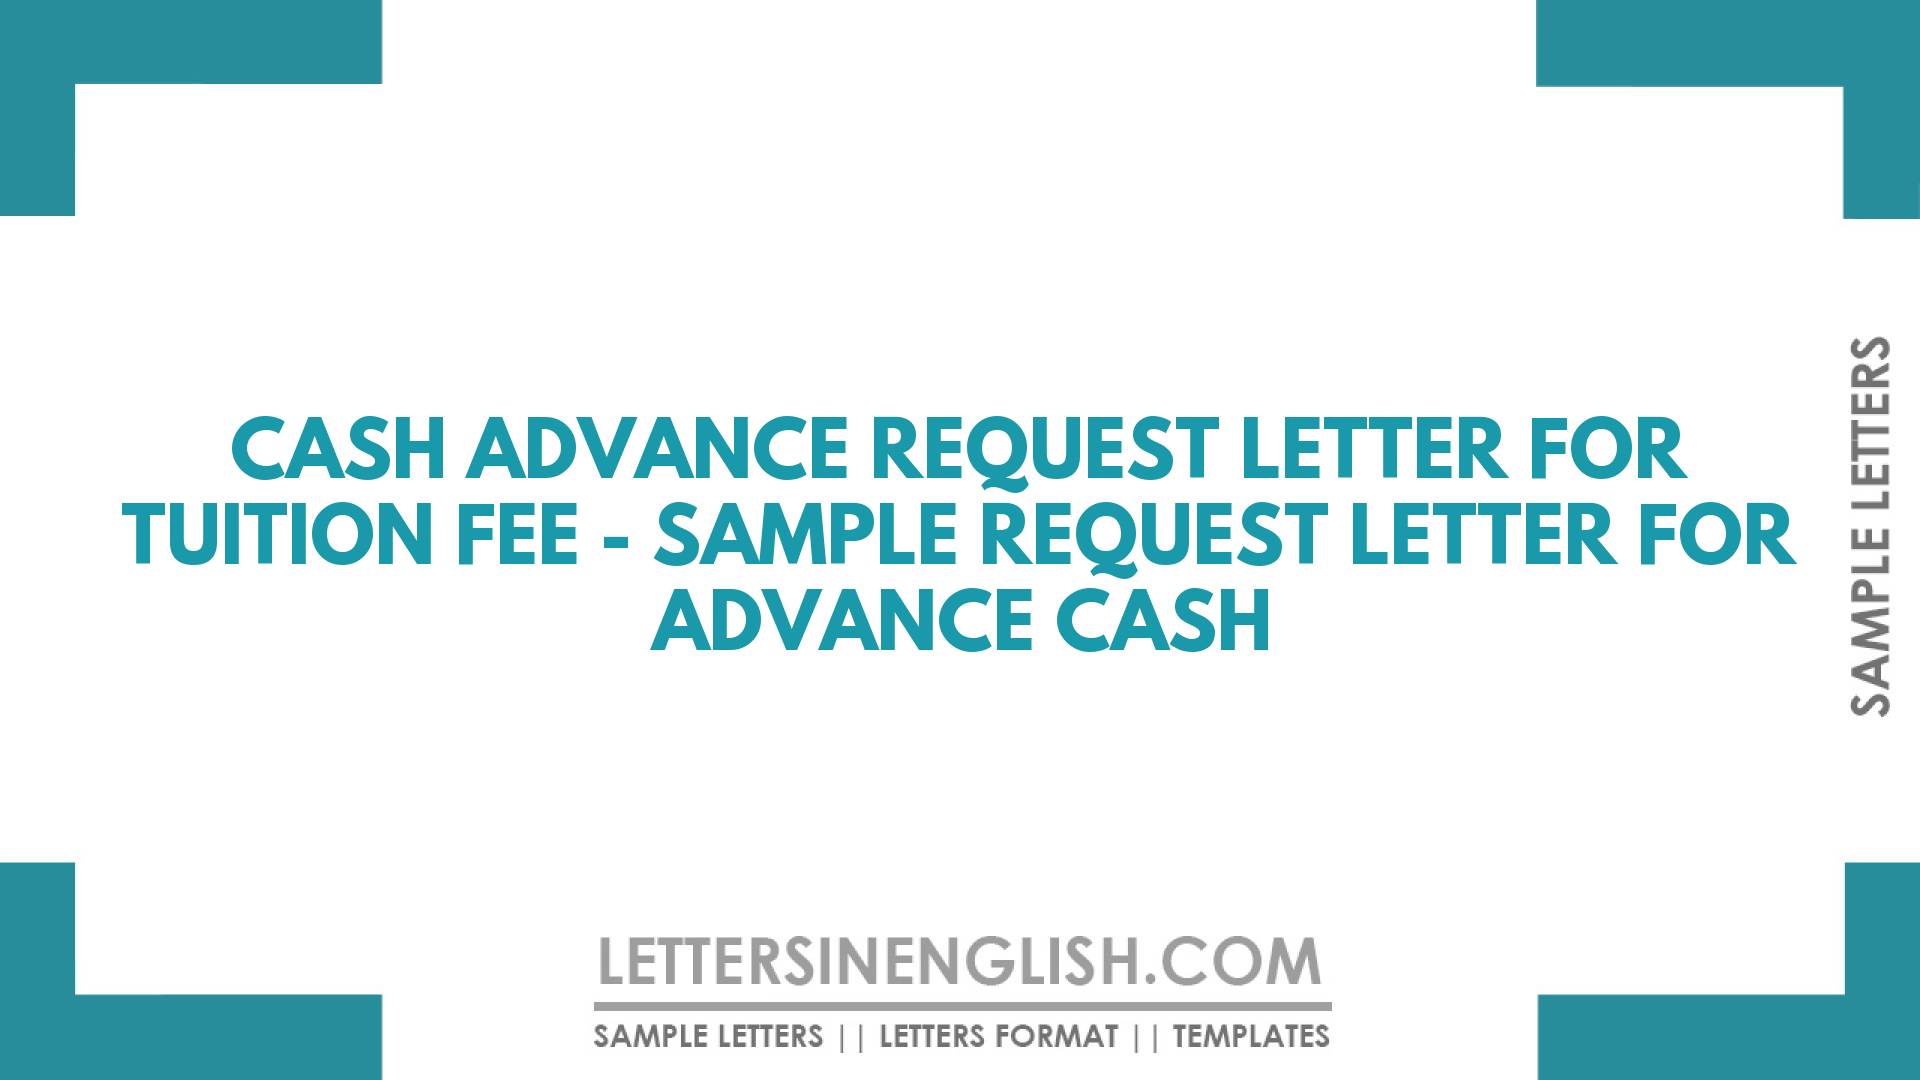 Cash Advance Request Letter for Tuition Fee – Sample Request Letter for Advance Cash